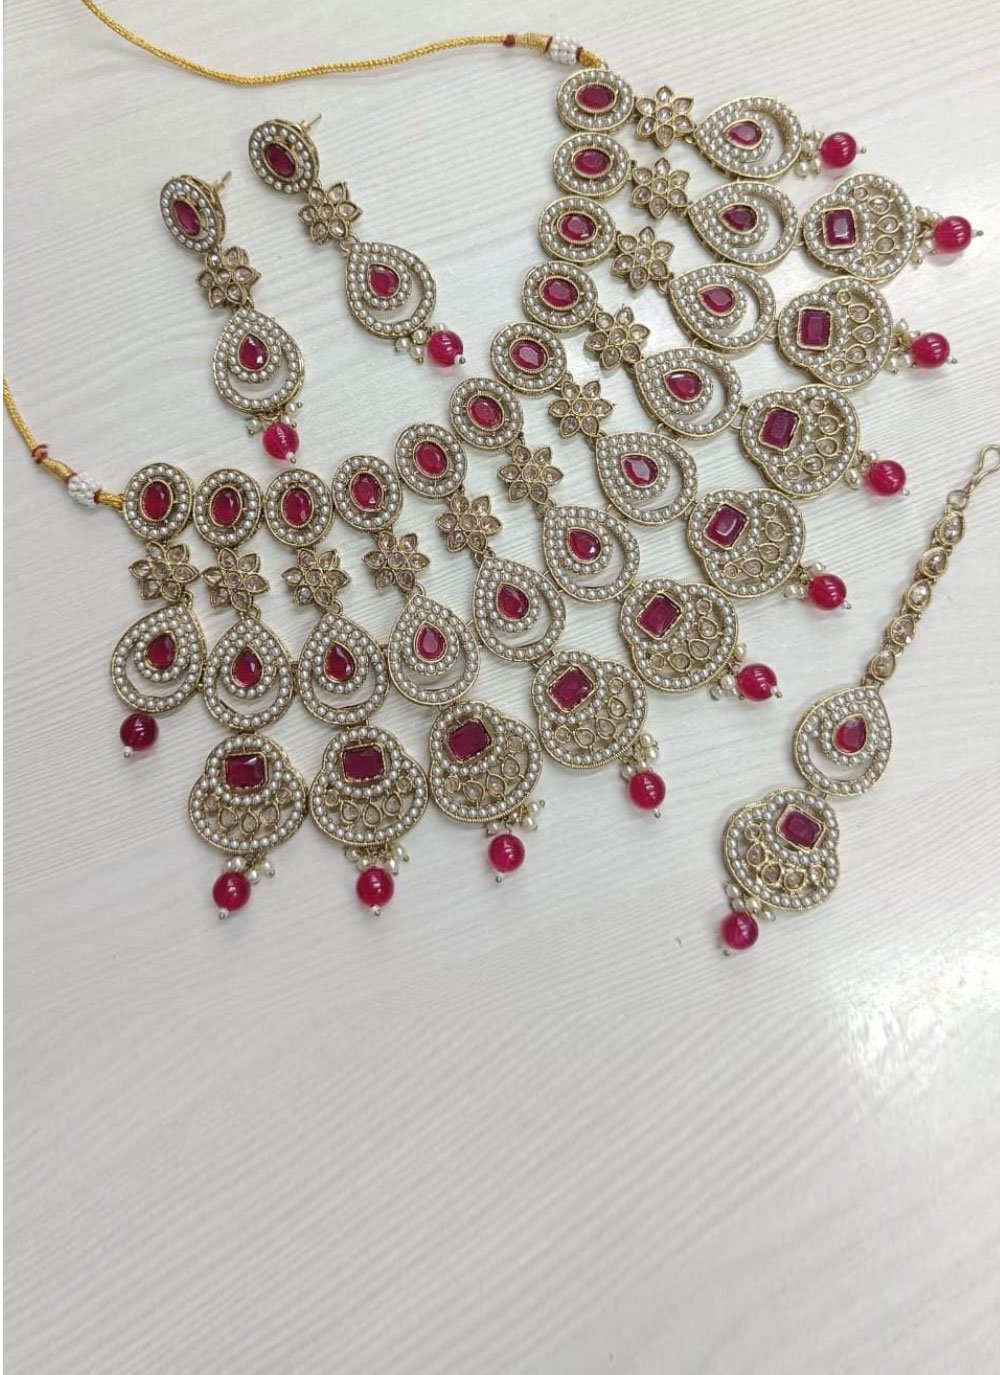 Buy Charming Beads Work Necklace Set Online